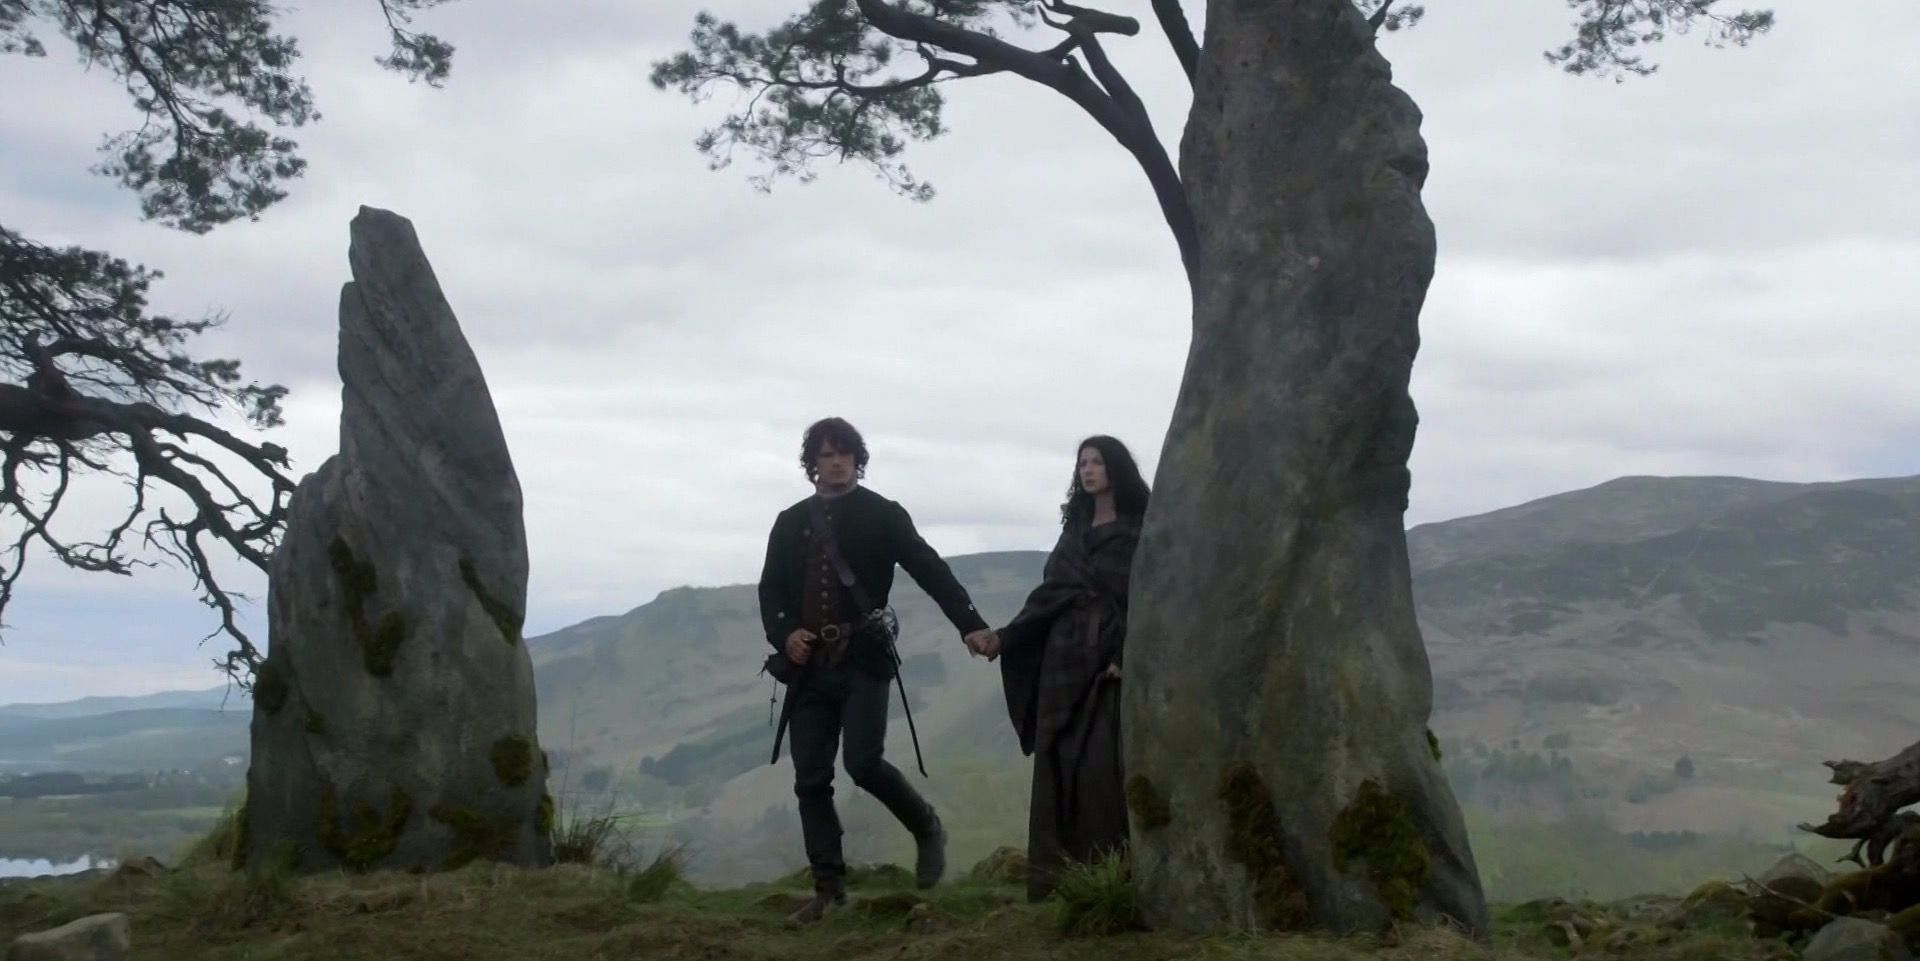 Outlander 10 Facts About Craigh Na Dun & The Stones You Missed